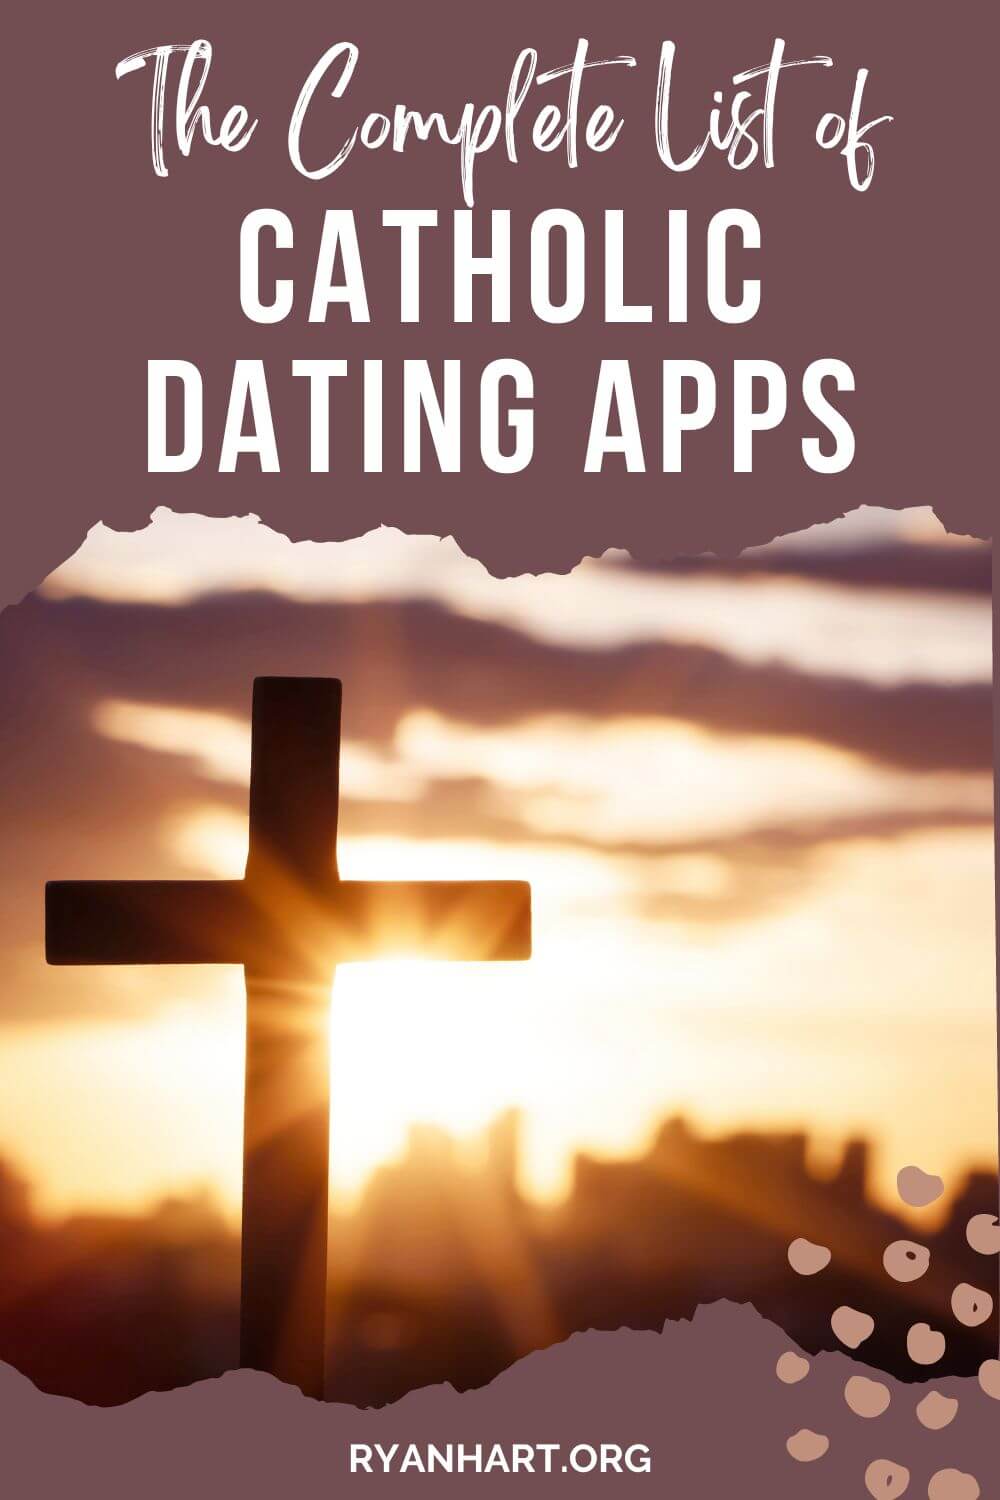 Catholic man and woman on a date